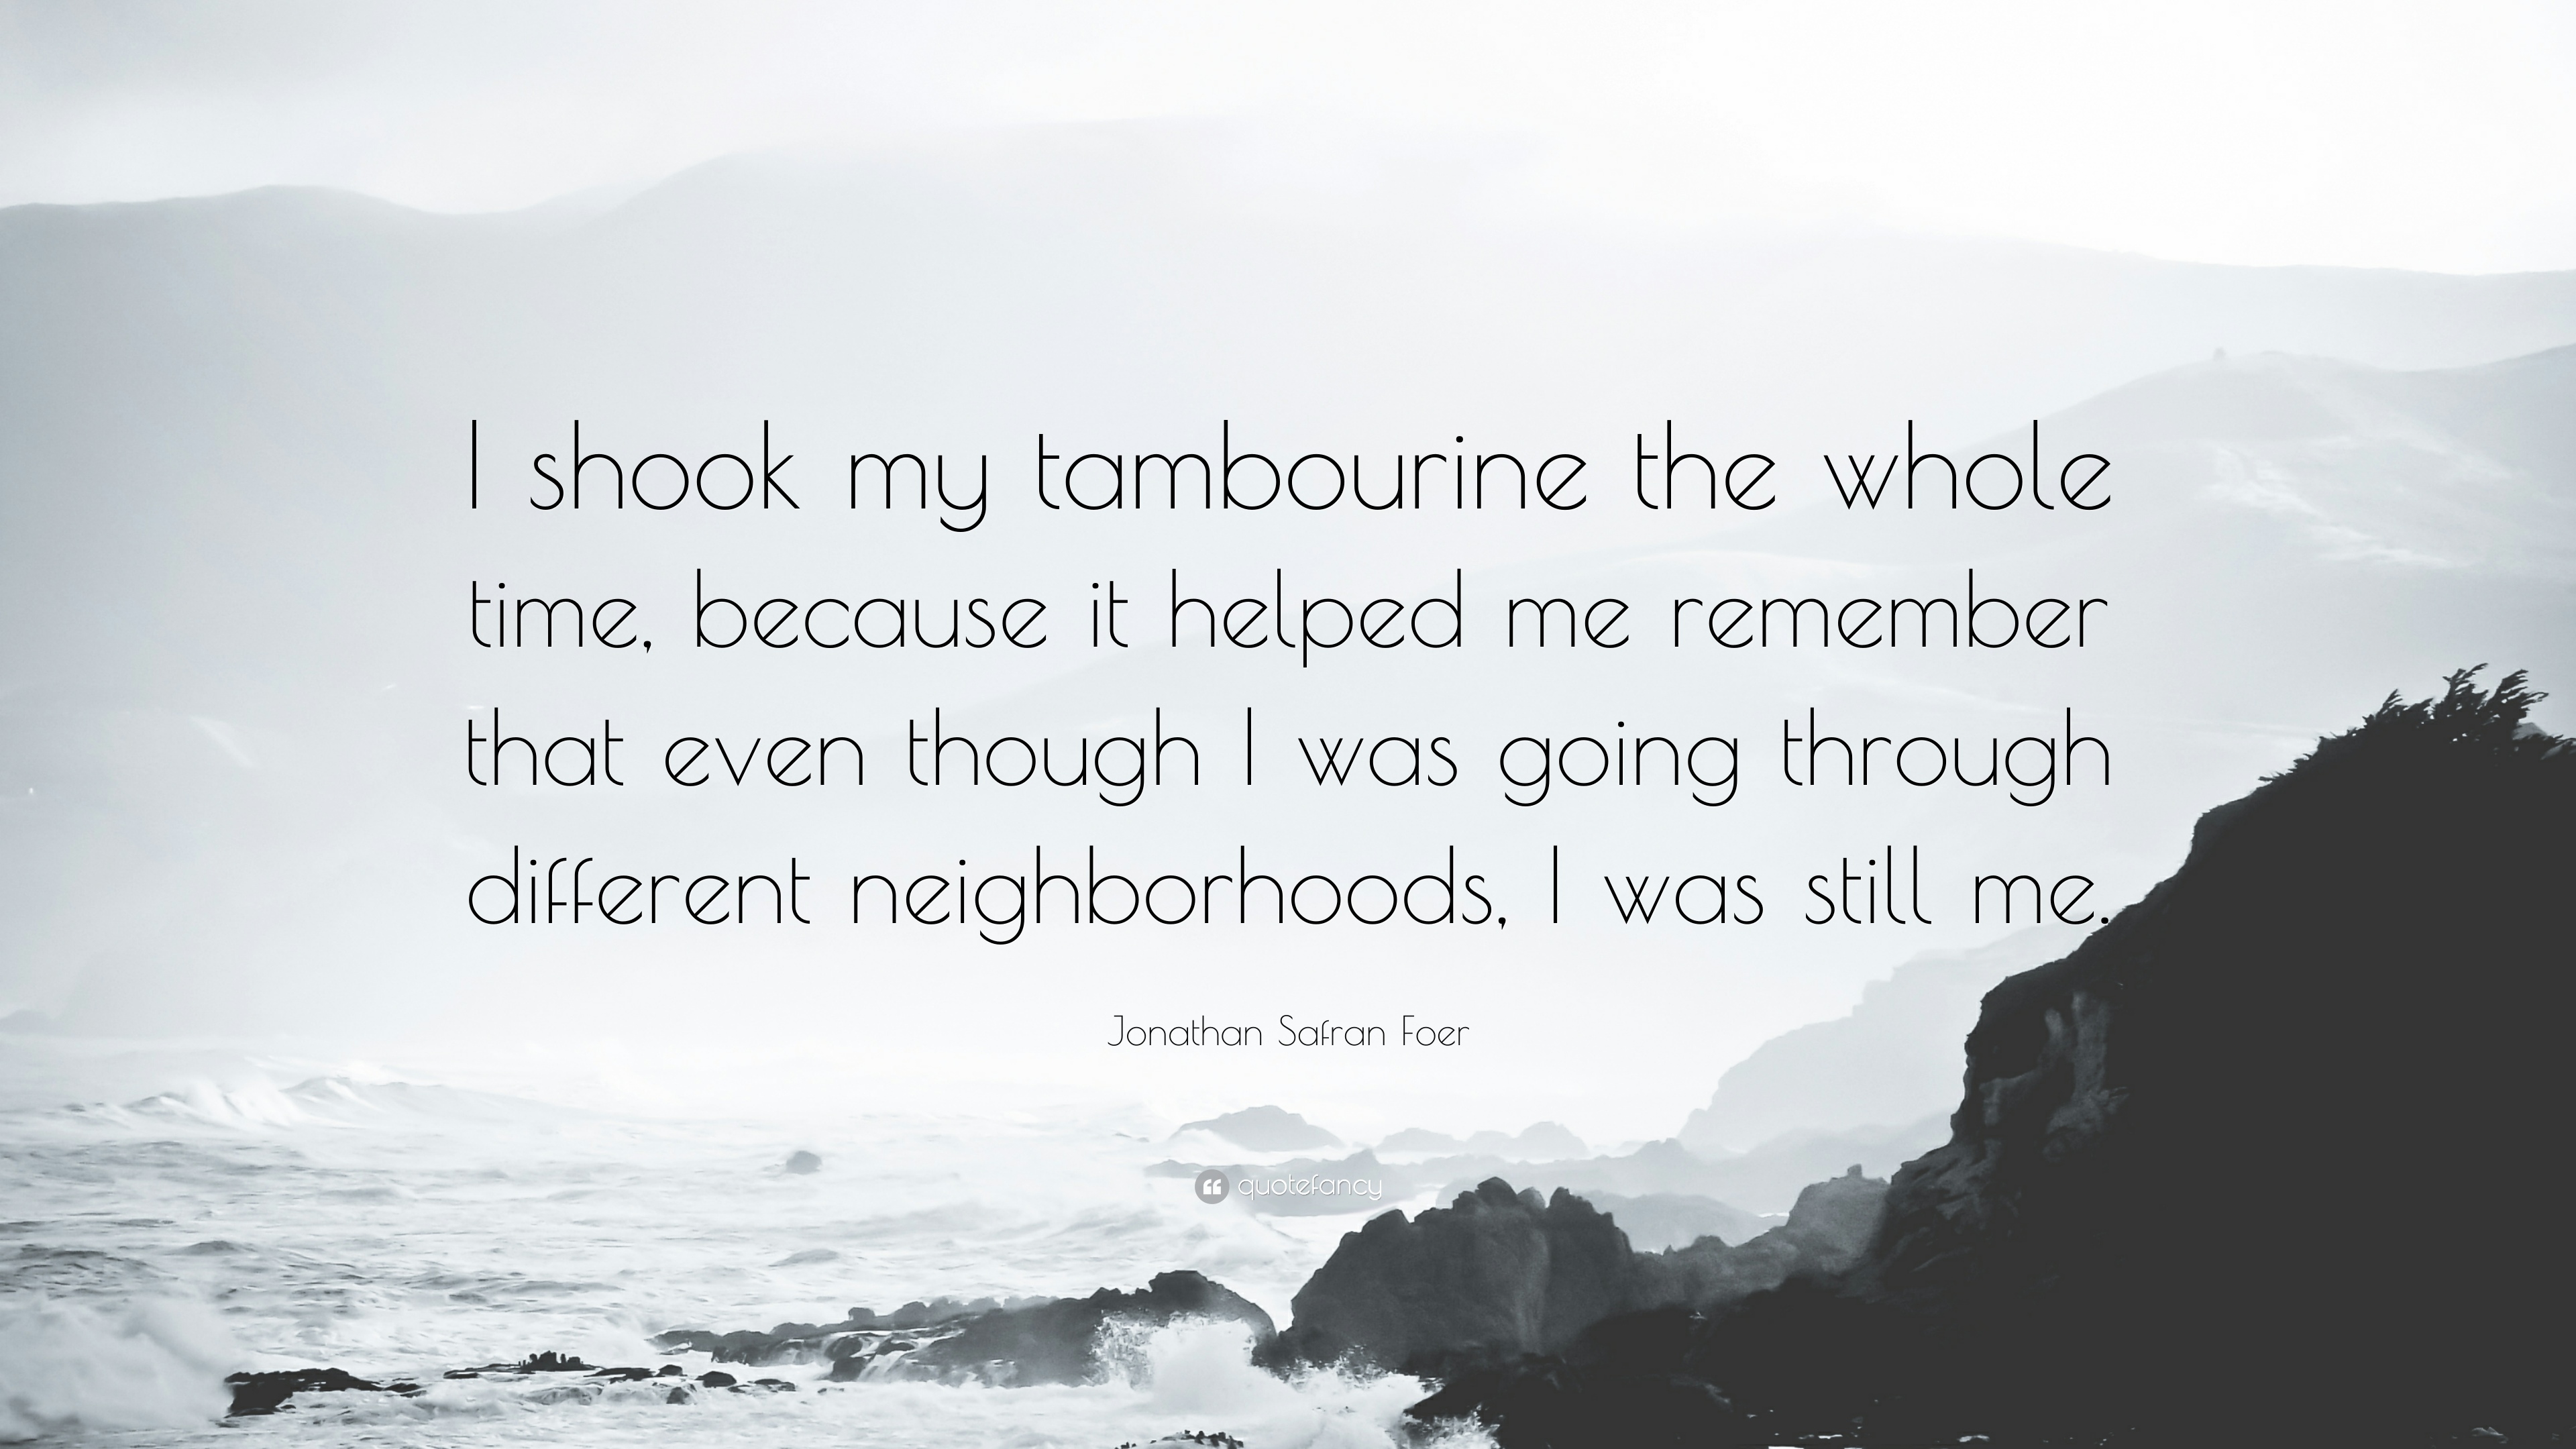 Jonathan Safran Foer Quote: “I shook my tambourine the whole time